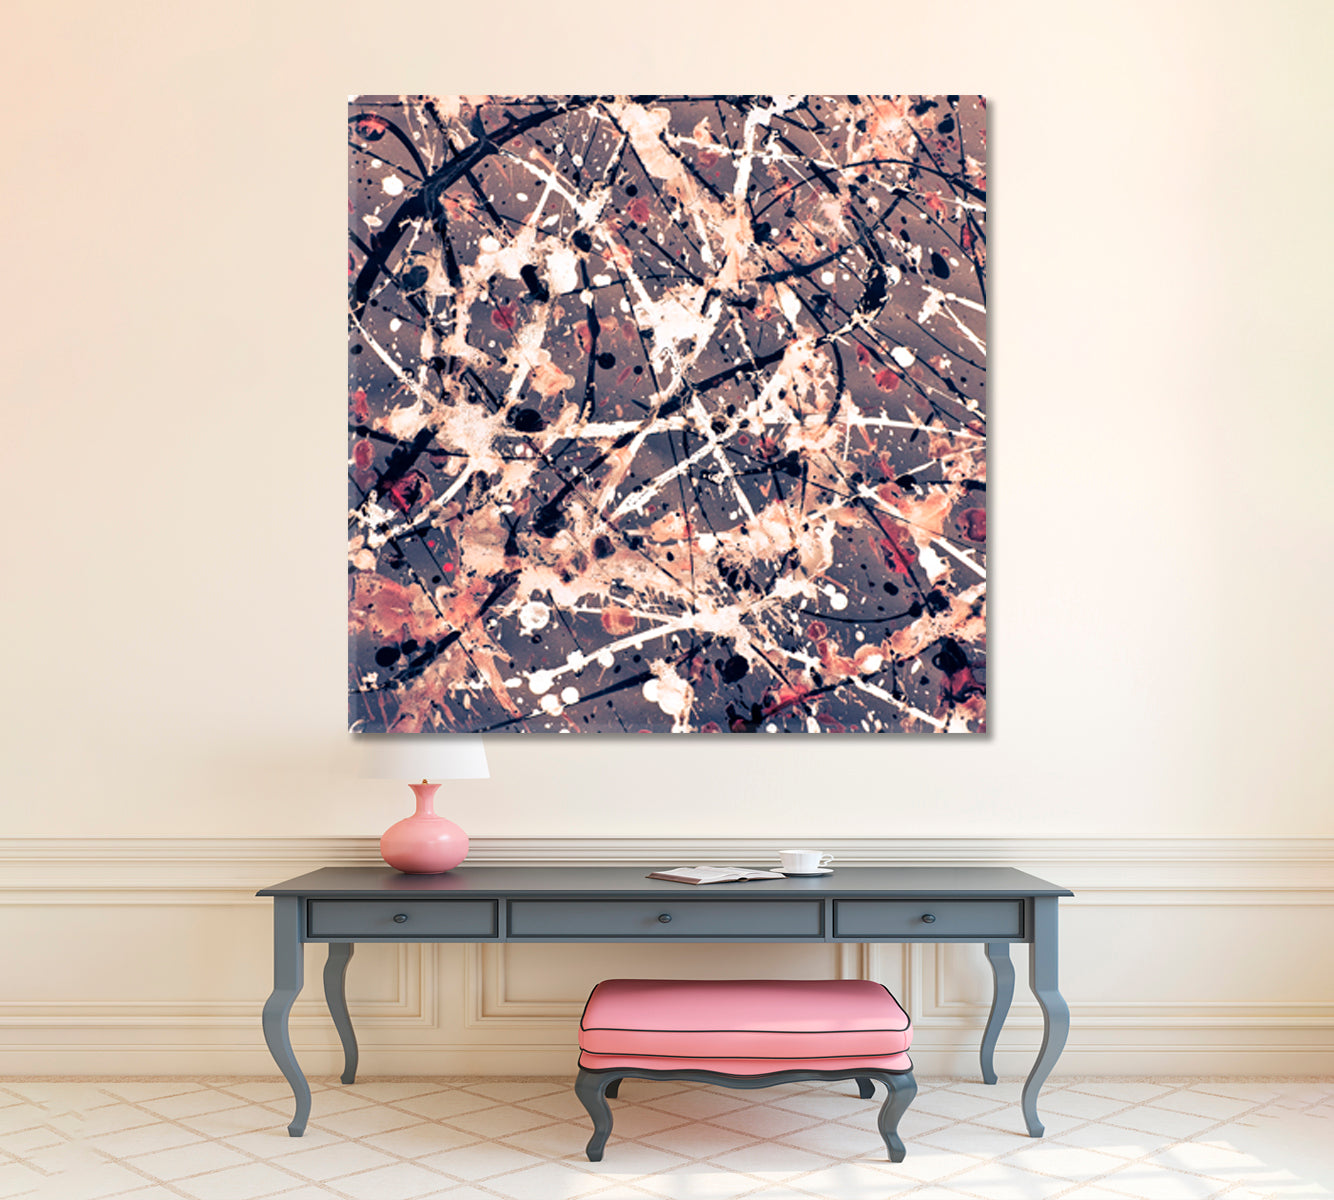 Style of Jackson Pollock Drip Art Abstract Expressionism Pattern, Square Panel Contemporary Art Artesty   